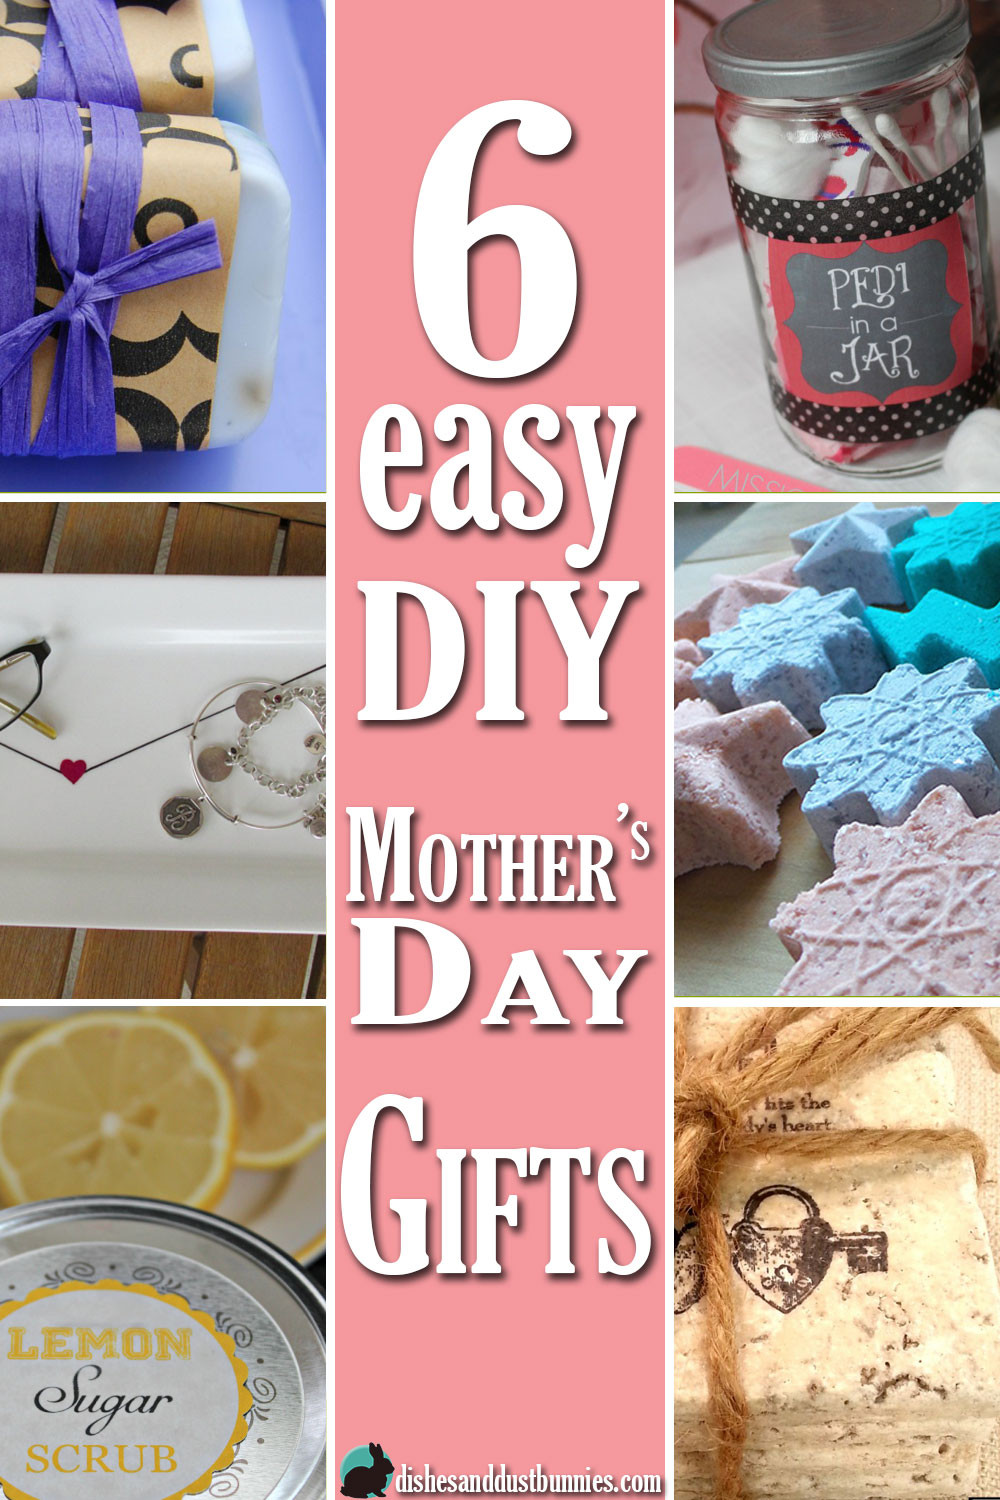 Easy DIY Father'S Day Gifts
 6 Easy DIY Mother s Day Gifts Dishes and Dust Bunnies